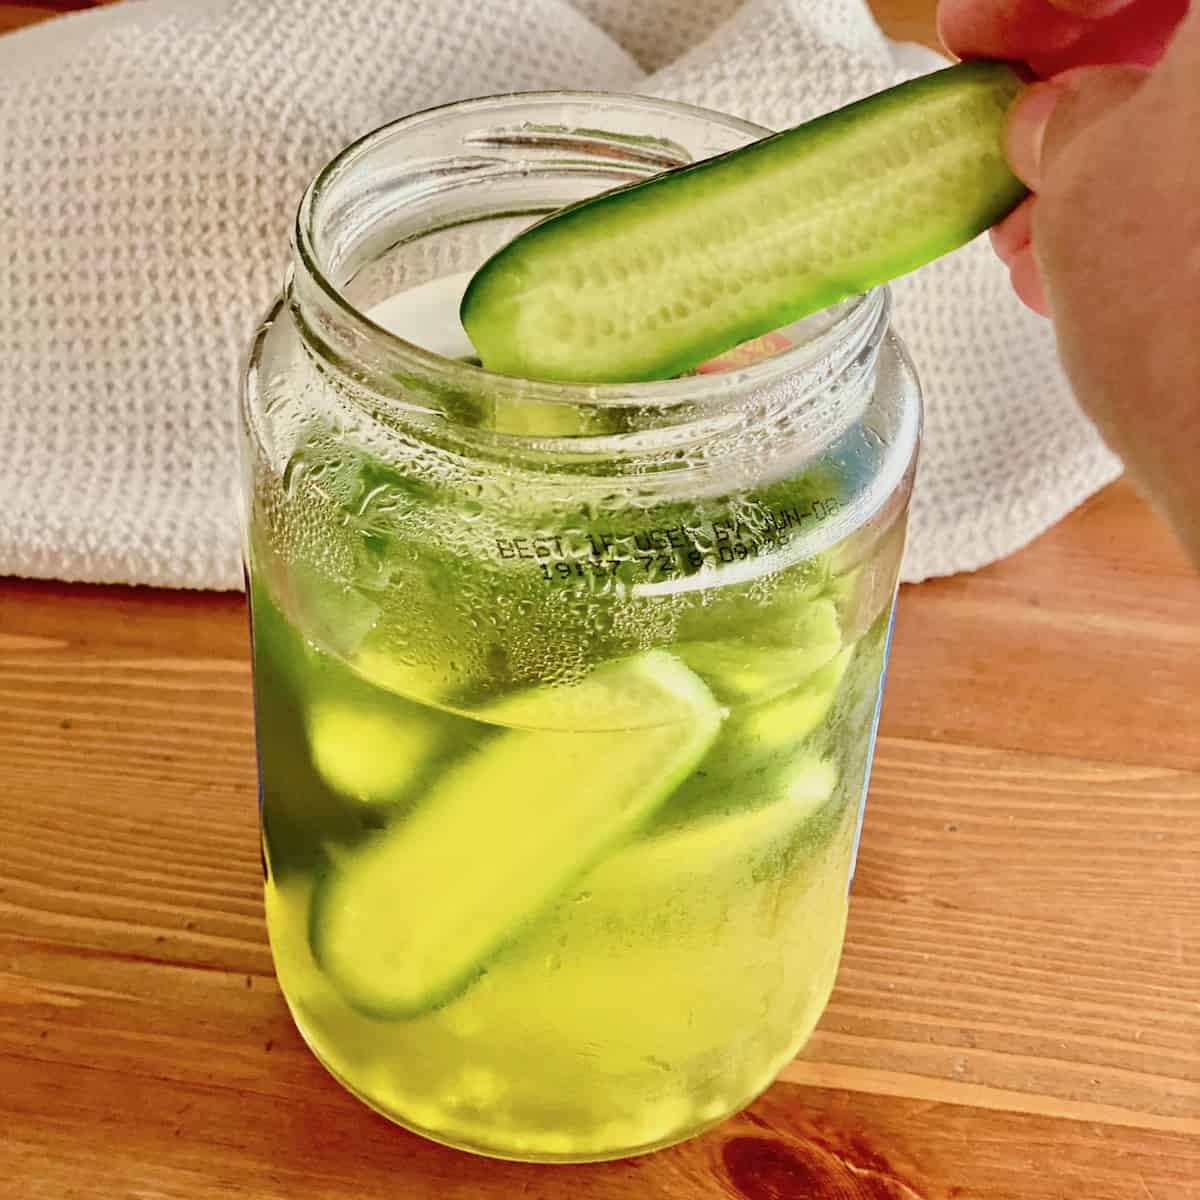 Homemade Pickles with Leftover Pickle Juice